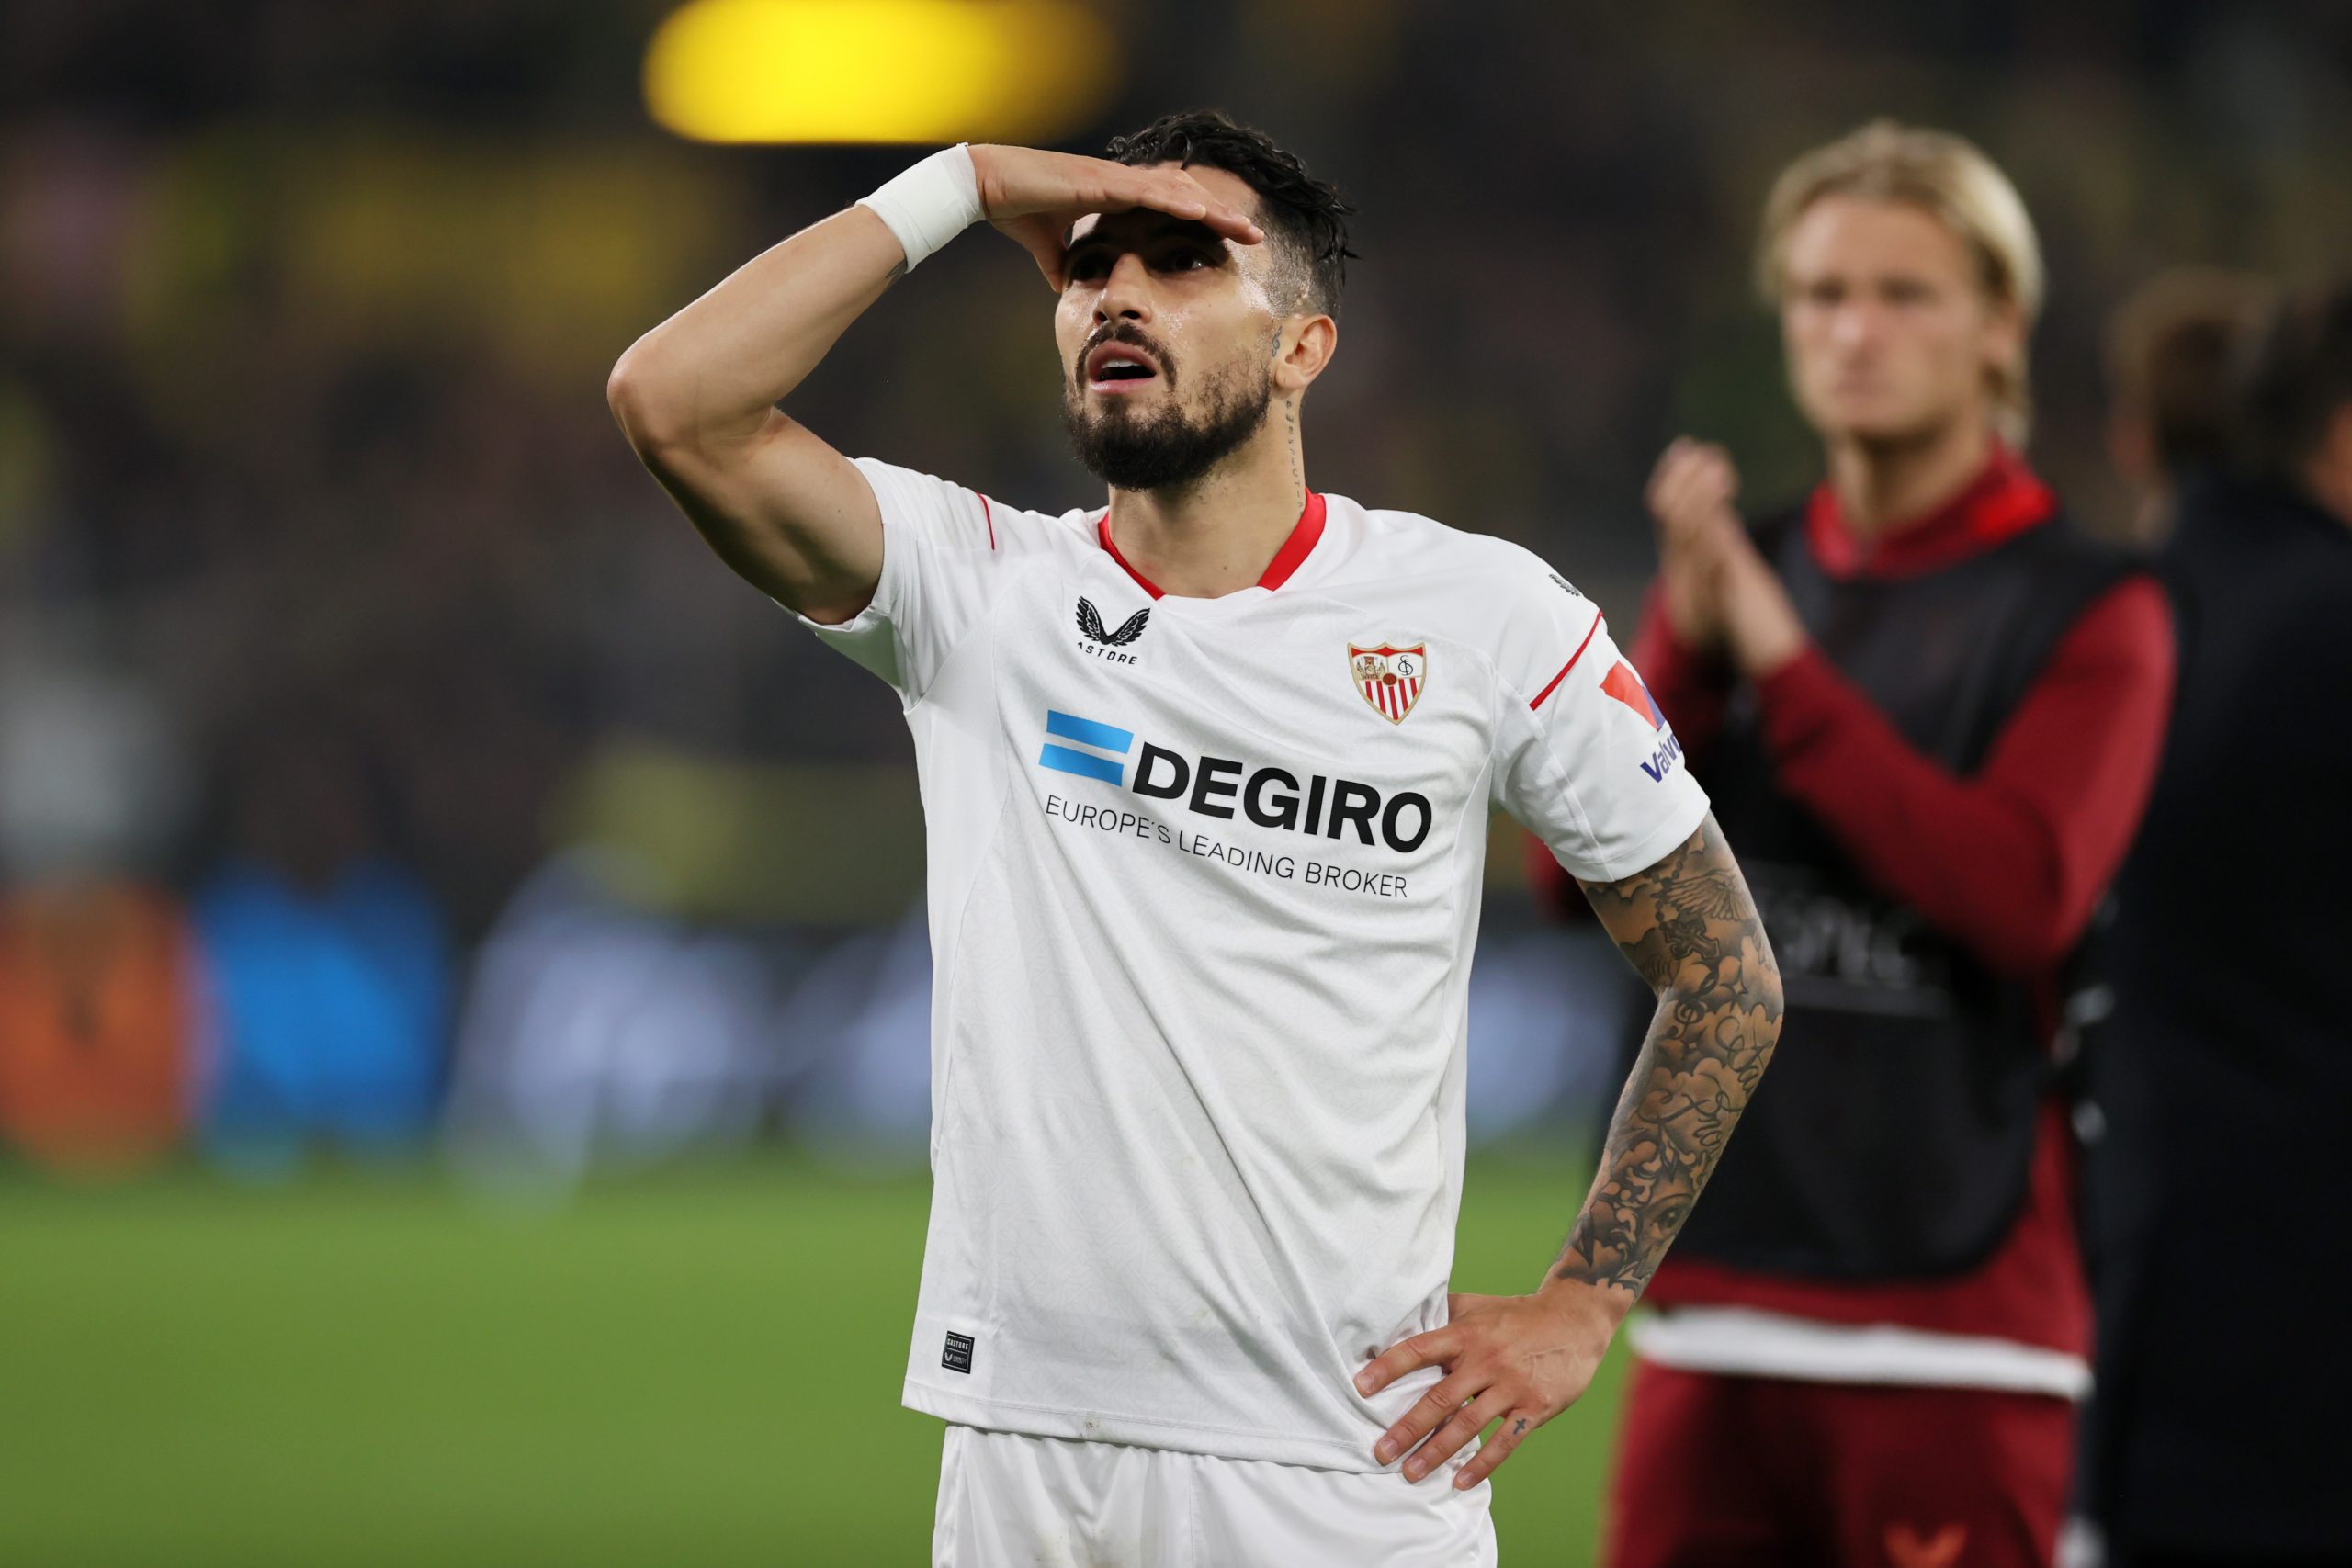 Alex Telles of Sevilla FC looks on after the final whistle of the UEFA Champions League group G match against Borussia Dortmund.